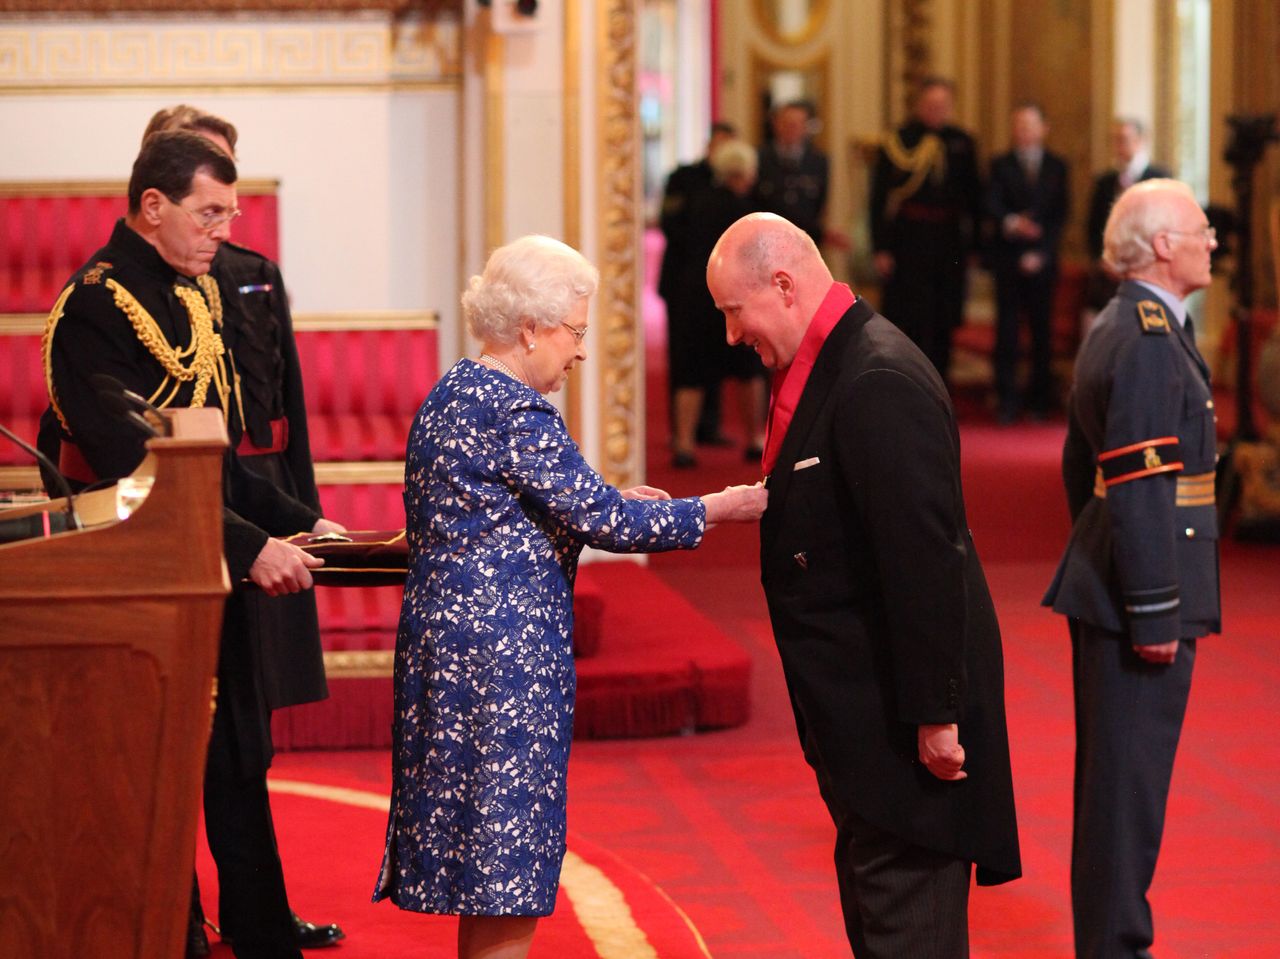 The Rt. Hon. Sir Christopher Geidt was made a Knight Commander of the Order of the Bath in 2014 by his then boss, Queen Elizabeth II.